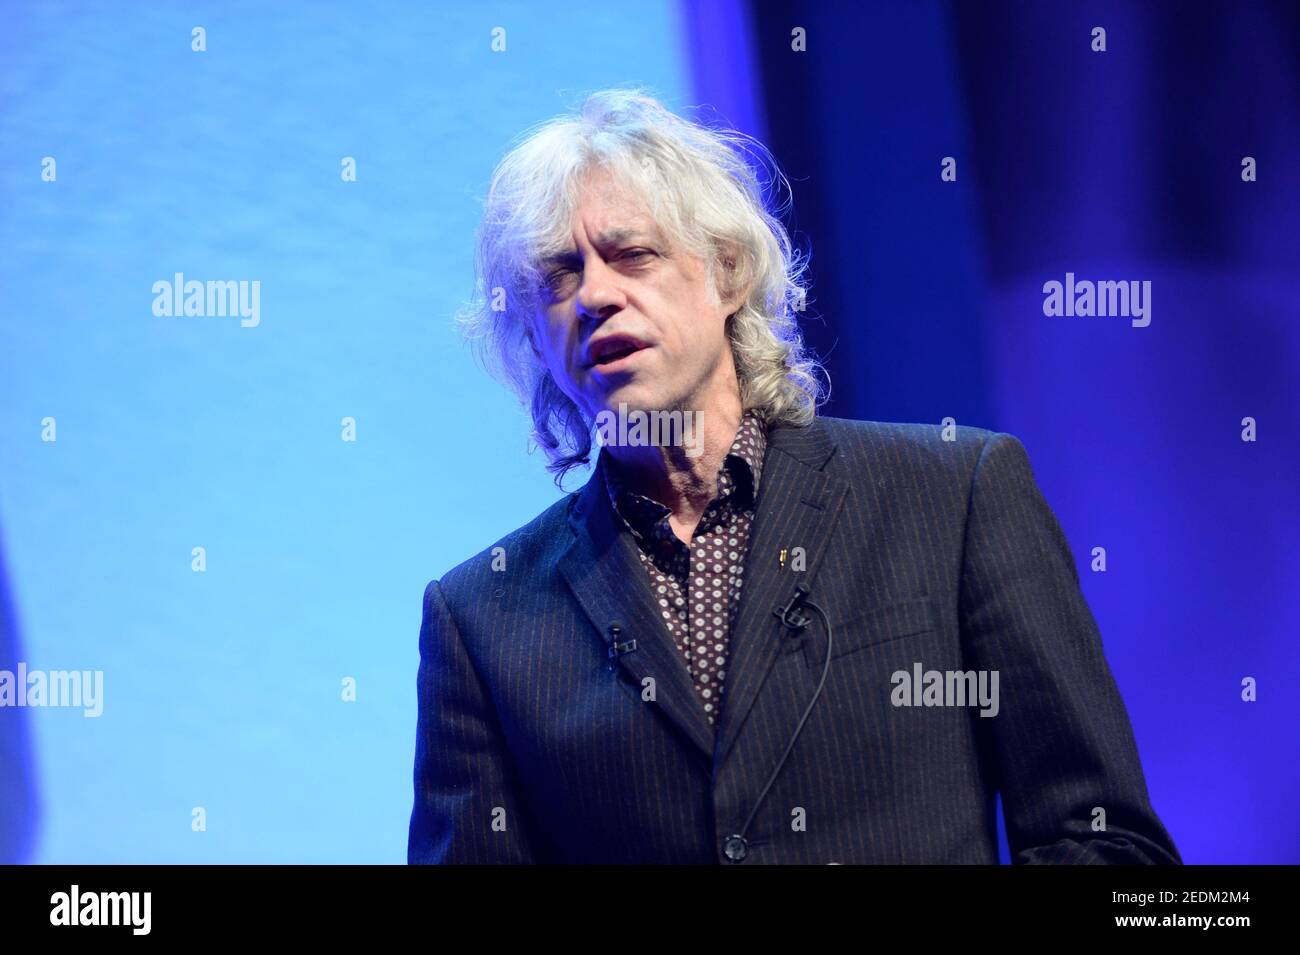 Bob Geldof is an Irish singer-songwriter, author, political activist, and occasional actor. He rose to prominence as the lead singer of the Irish rock band the Boomtown Rats in the late 1970s, who achieved popularity at the time of the punk rock movement. The band had UK number one hits with his compositions 'Rat Trap' and 'I Don't Like Mondays'.[2][3] Geldof starred as 'Pink' in Pink Floyd's 1982 film Pink Floyd – The Wall. As a fundraiser, Geldof organised the charity supergroup Band Aid and the concerts Live Aid and Live 8, and co-wrote 'Do They Know It's Christmas?' Stock Photo